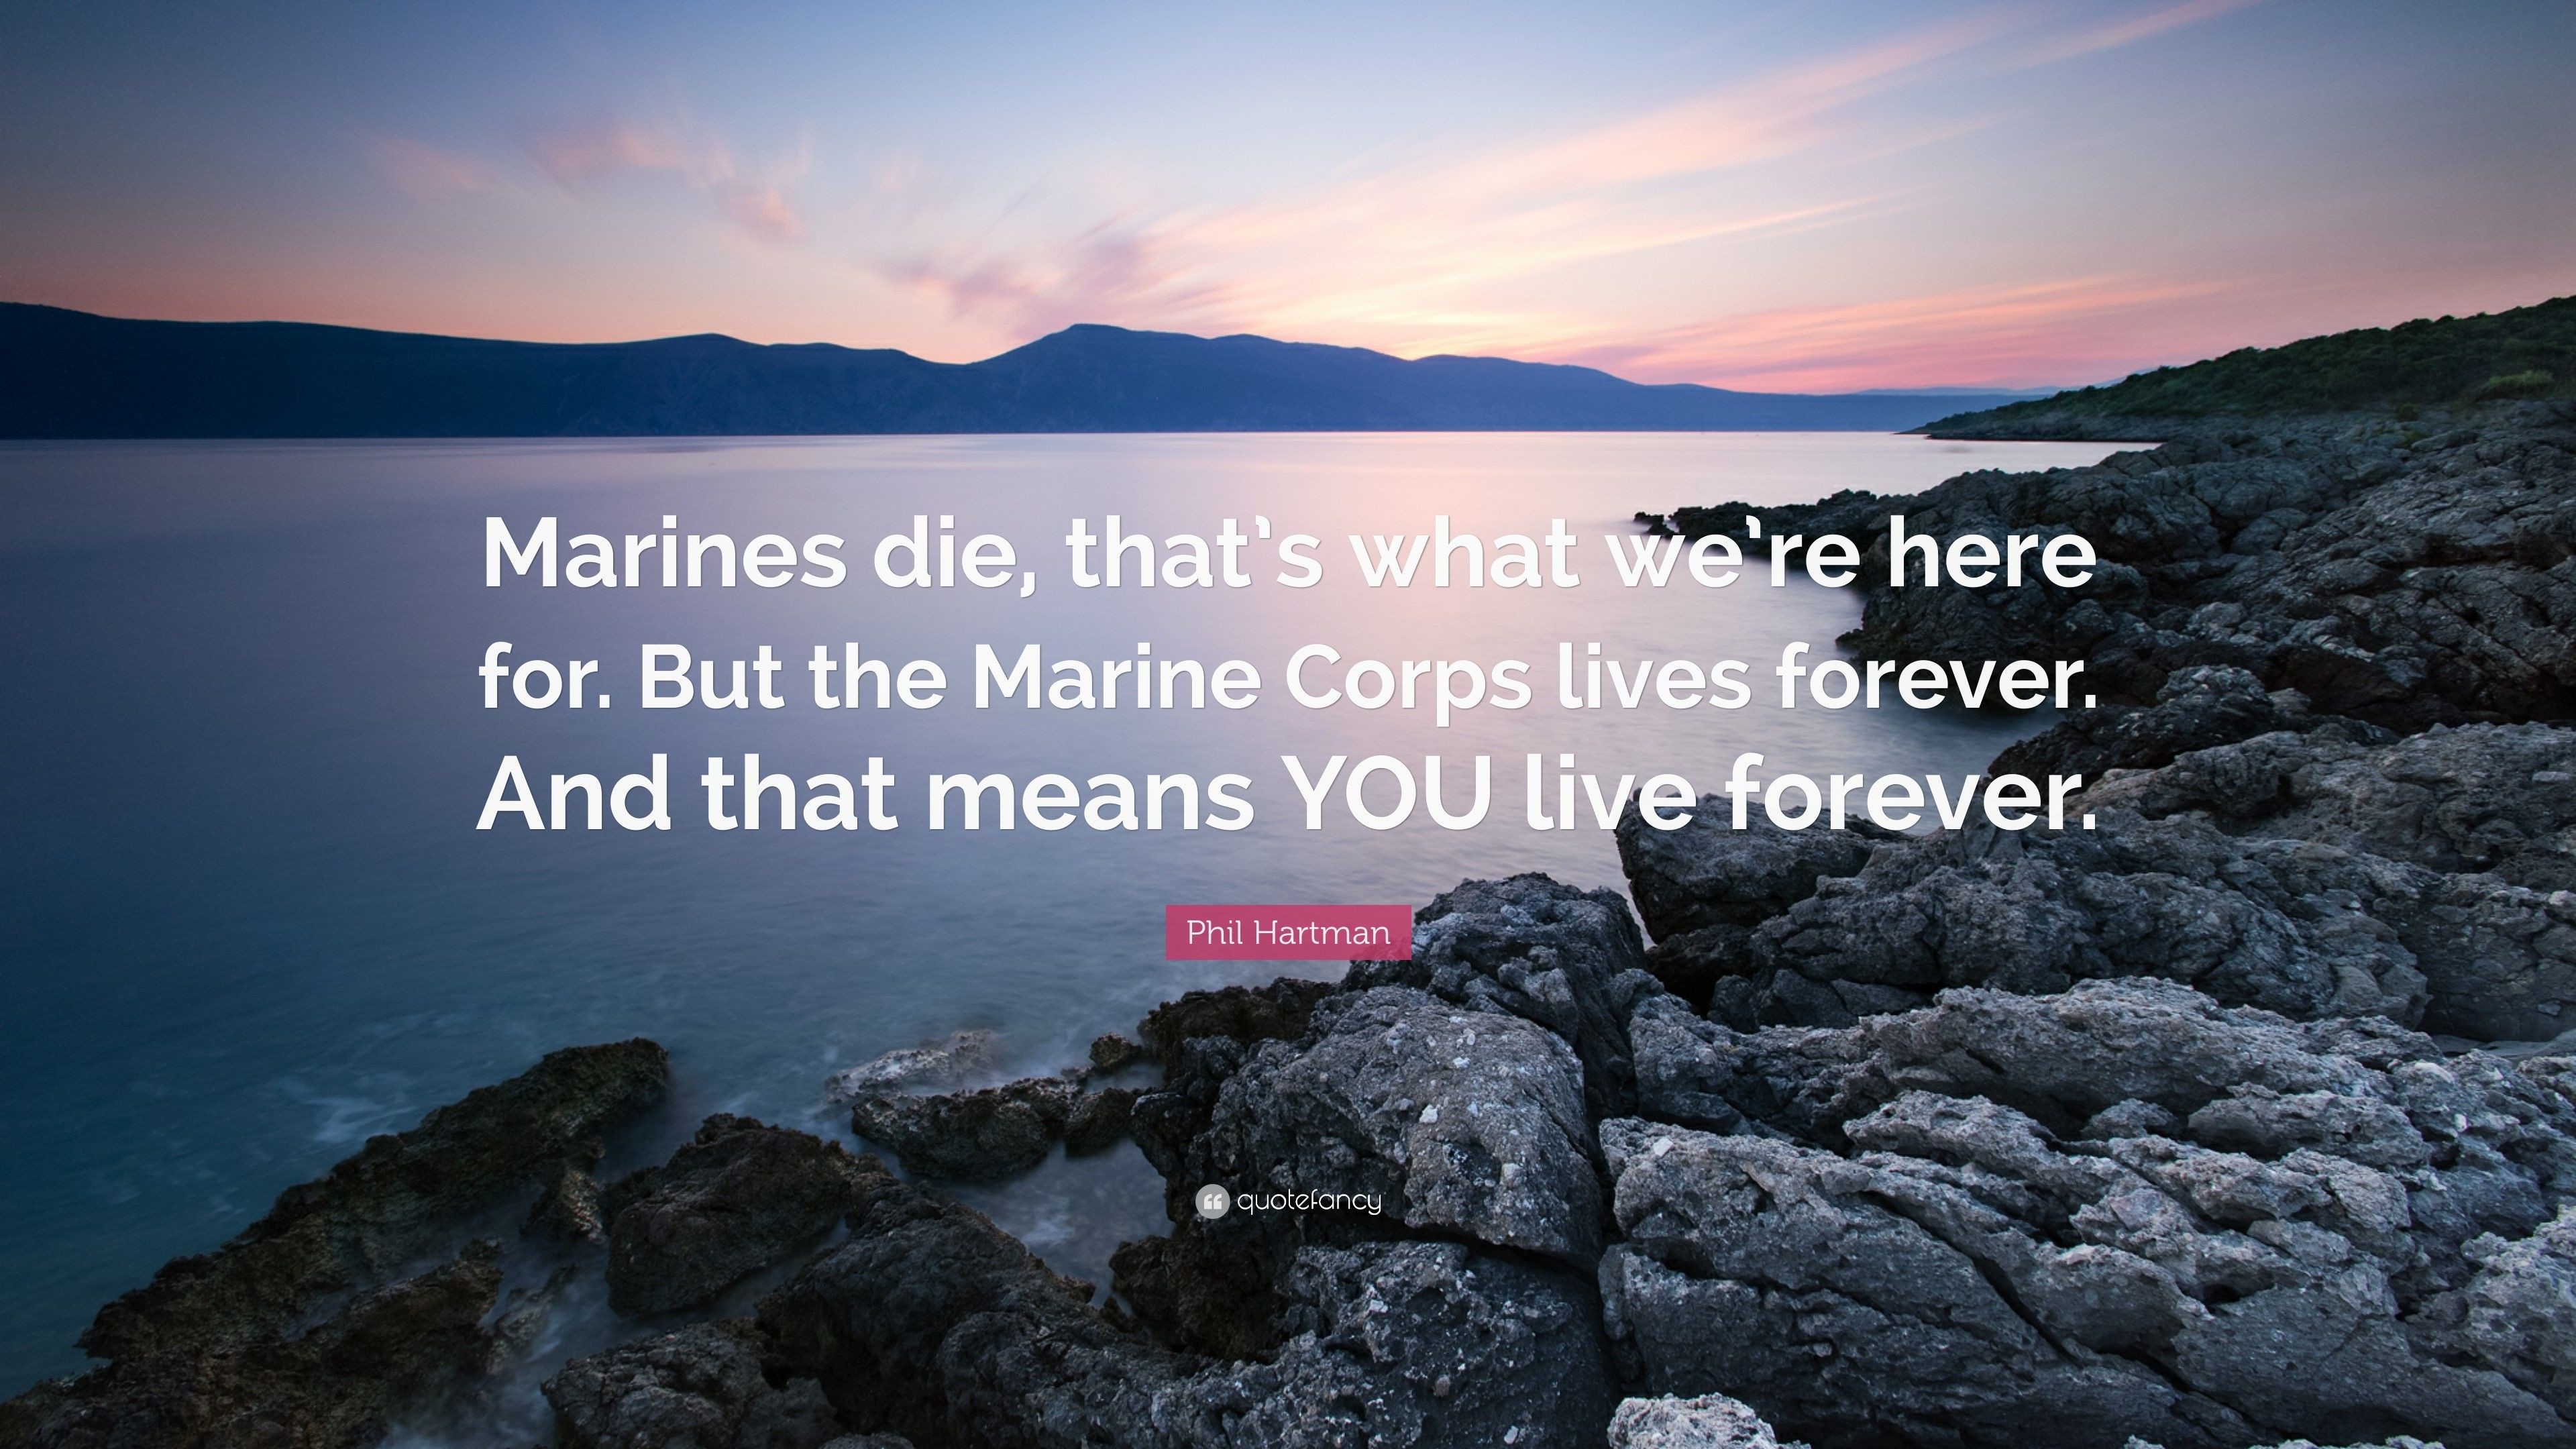 3840x2160 2560x1600 Marine Corps Wallpaper (57+ images)">